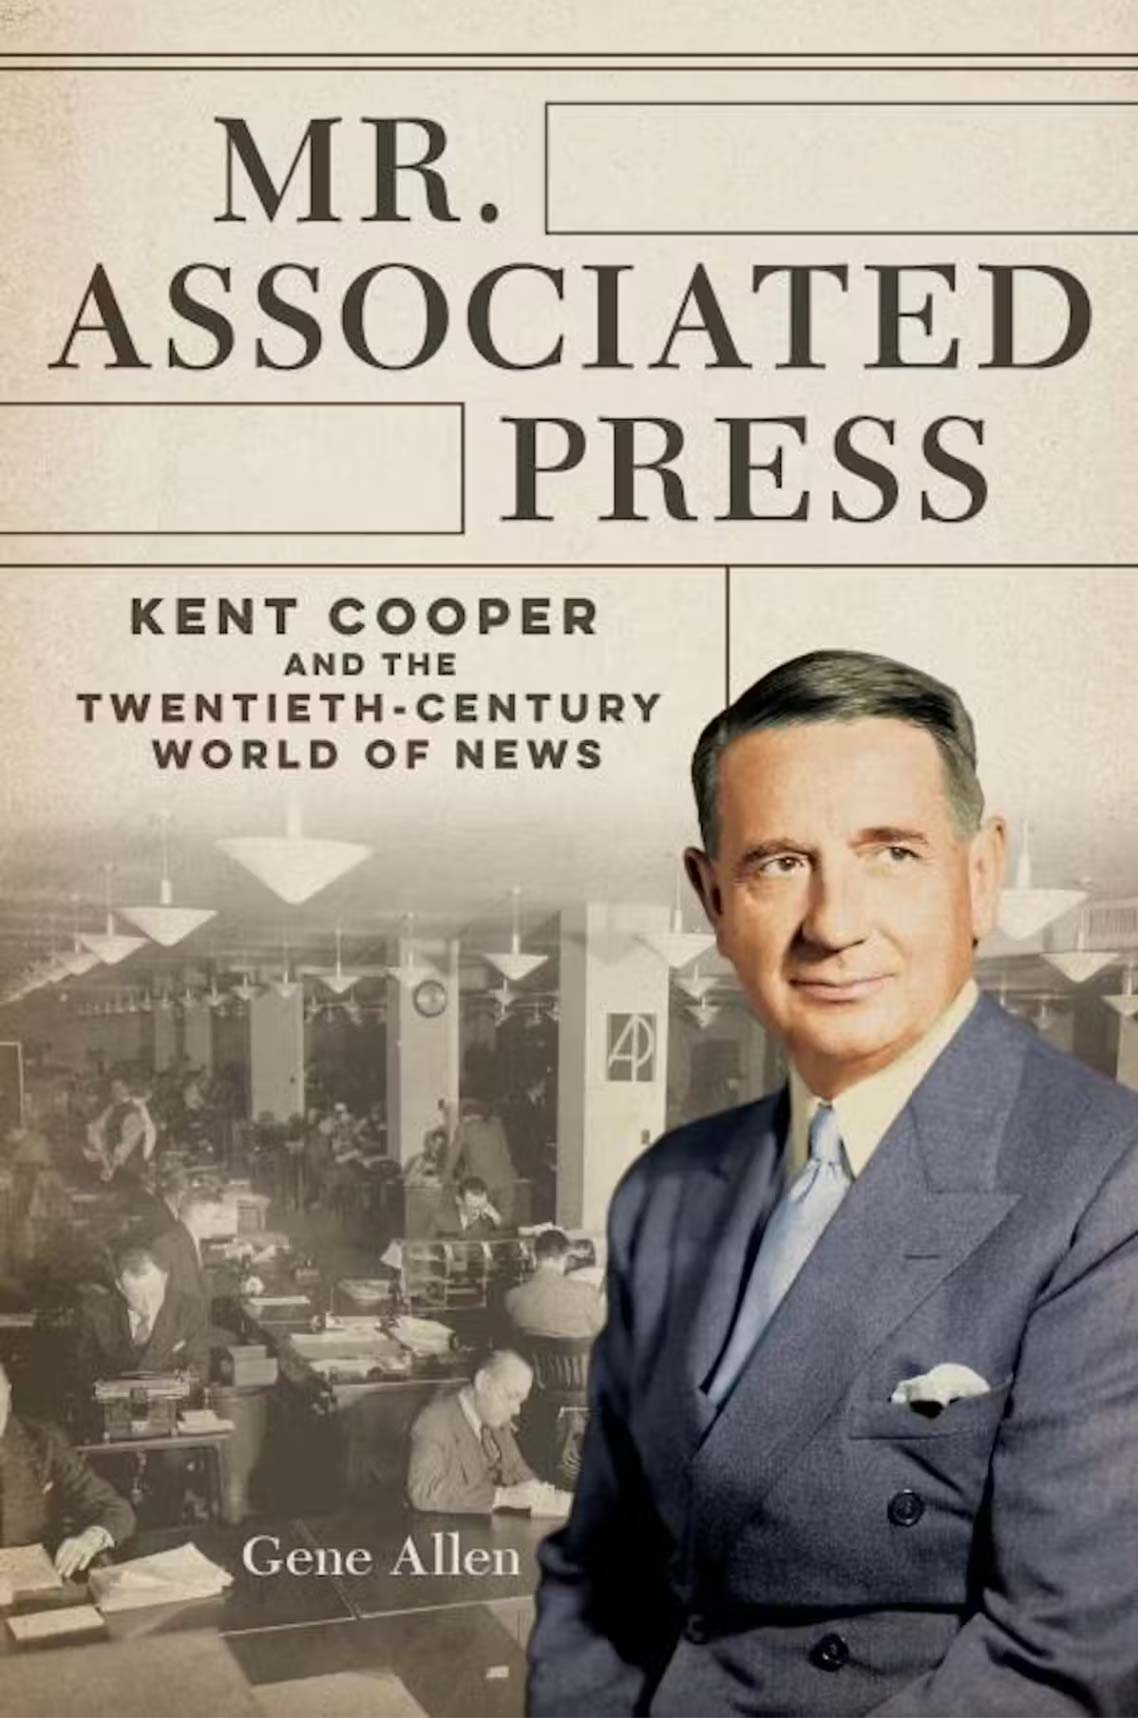 A book cover with a middle-aged white man in a suit on the cover and a black-and-white photograph of a newsroom in the background